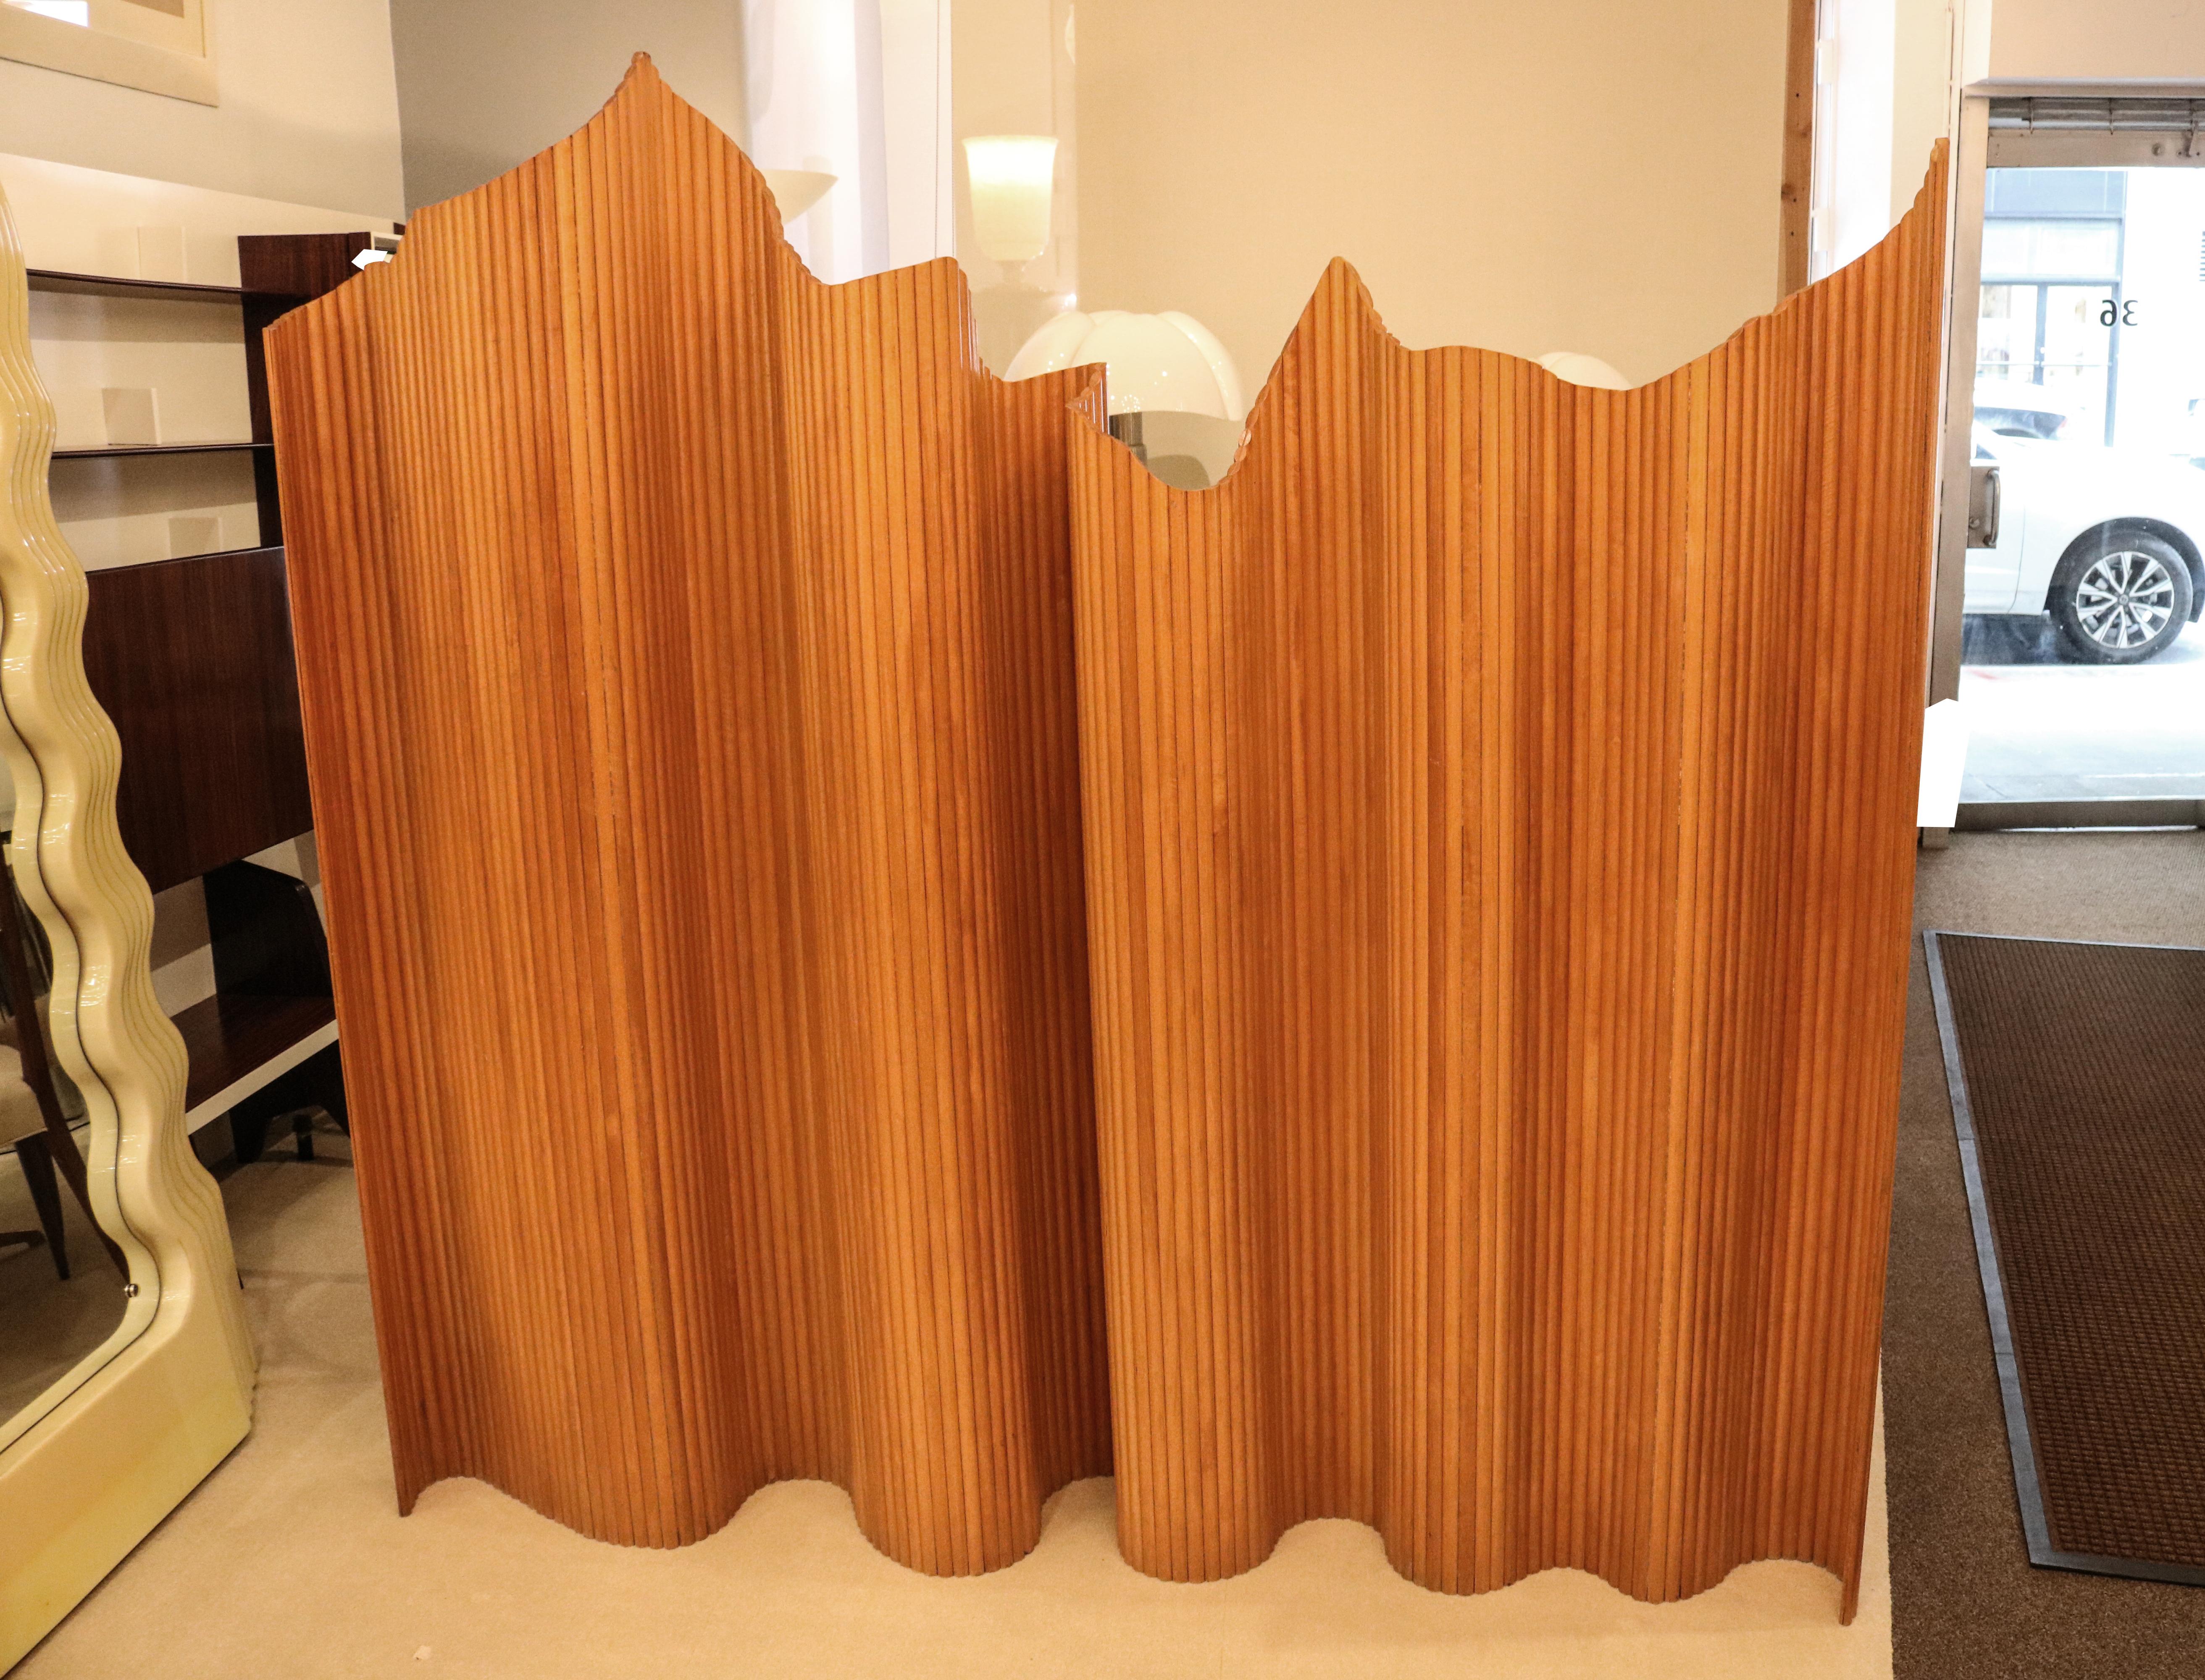 Cherrywood Italian Modernist tambour screen / room divider. Beautiful interior design element crafted from vertical cherrywood slats and can be rolled up and opened in numerous dynamic curved positions.

Max H: 70¼    Min H: 55  Fully Extended W: